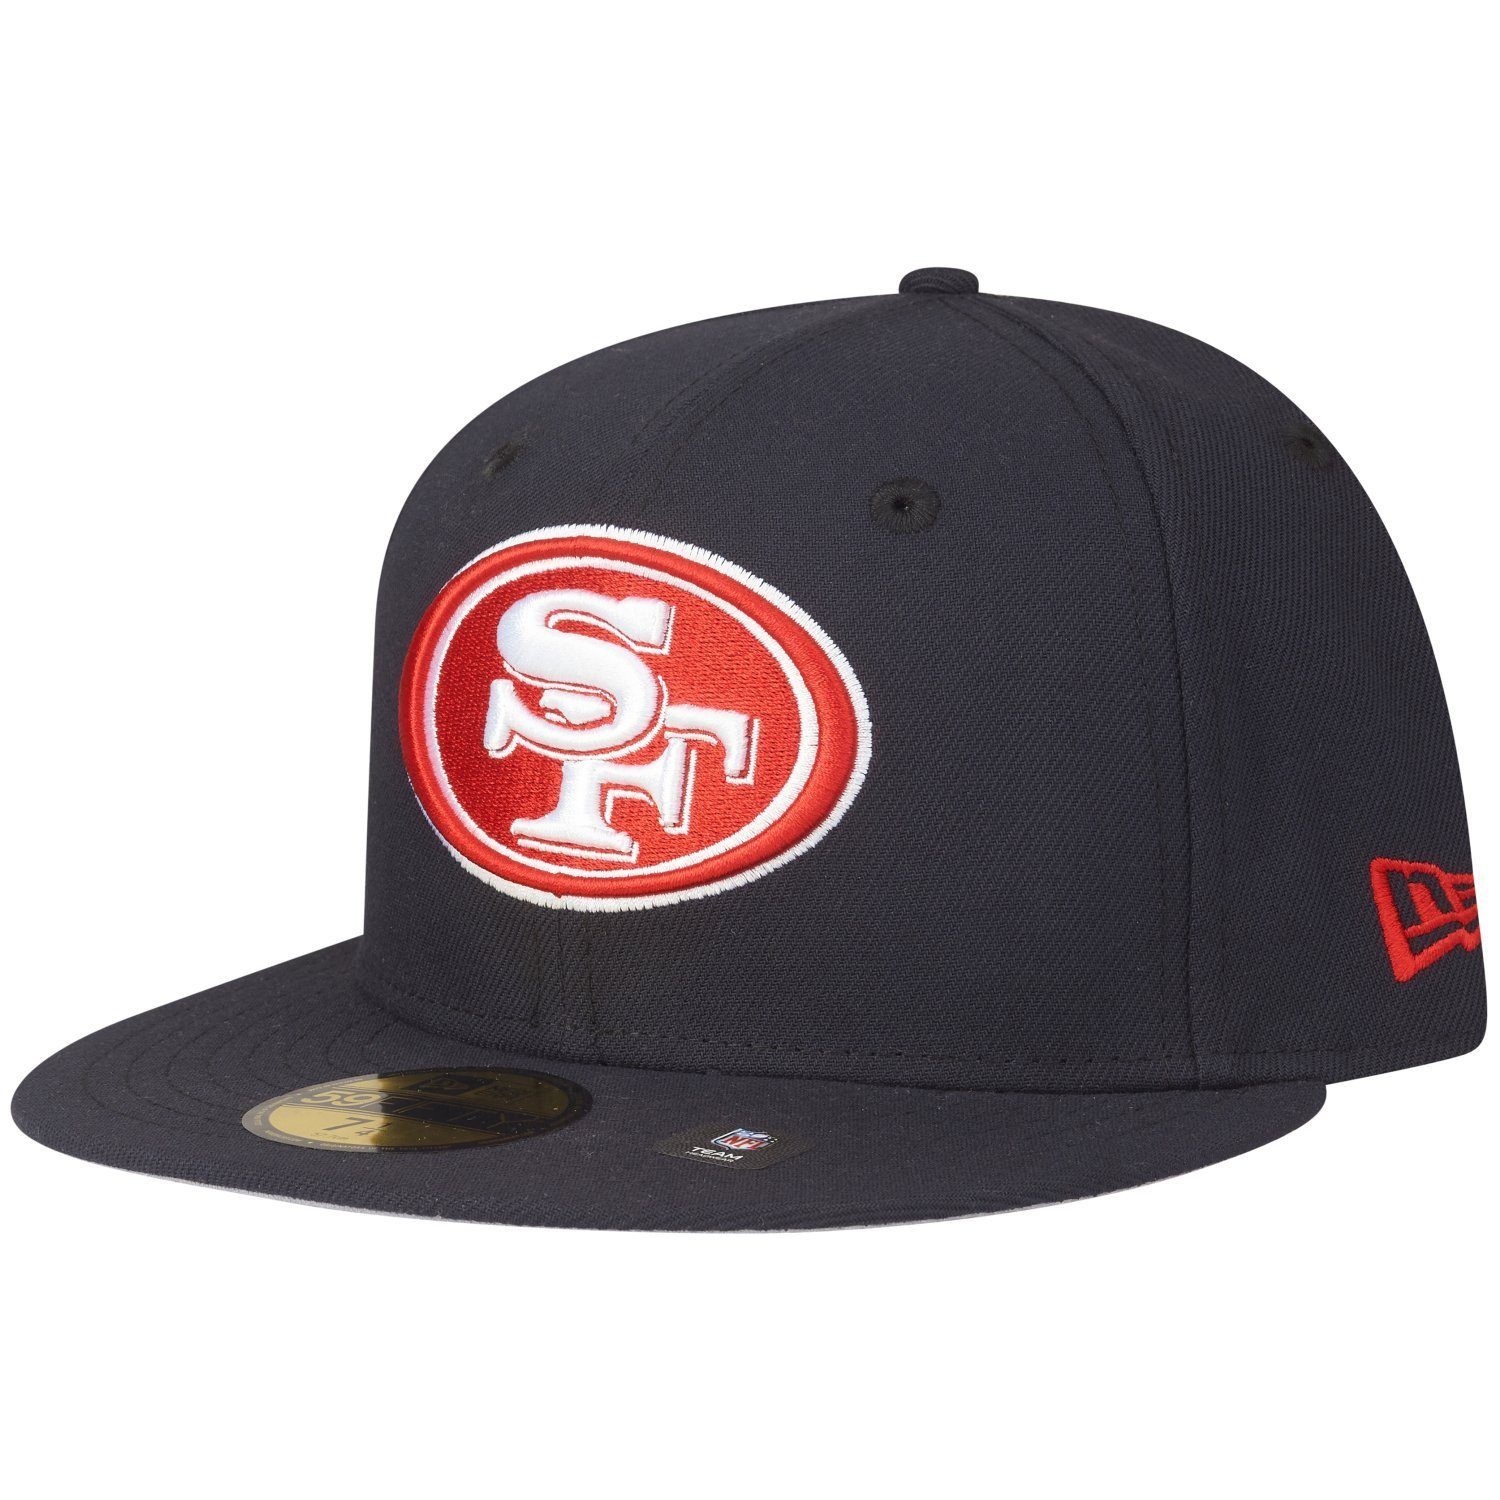 New Era Fitted Cap TEAMS 49ers San red 59Fifty NFL Francisco